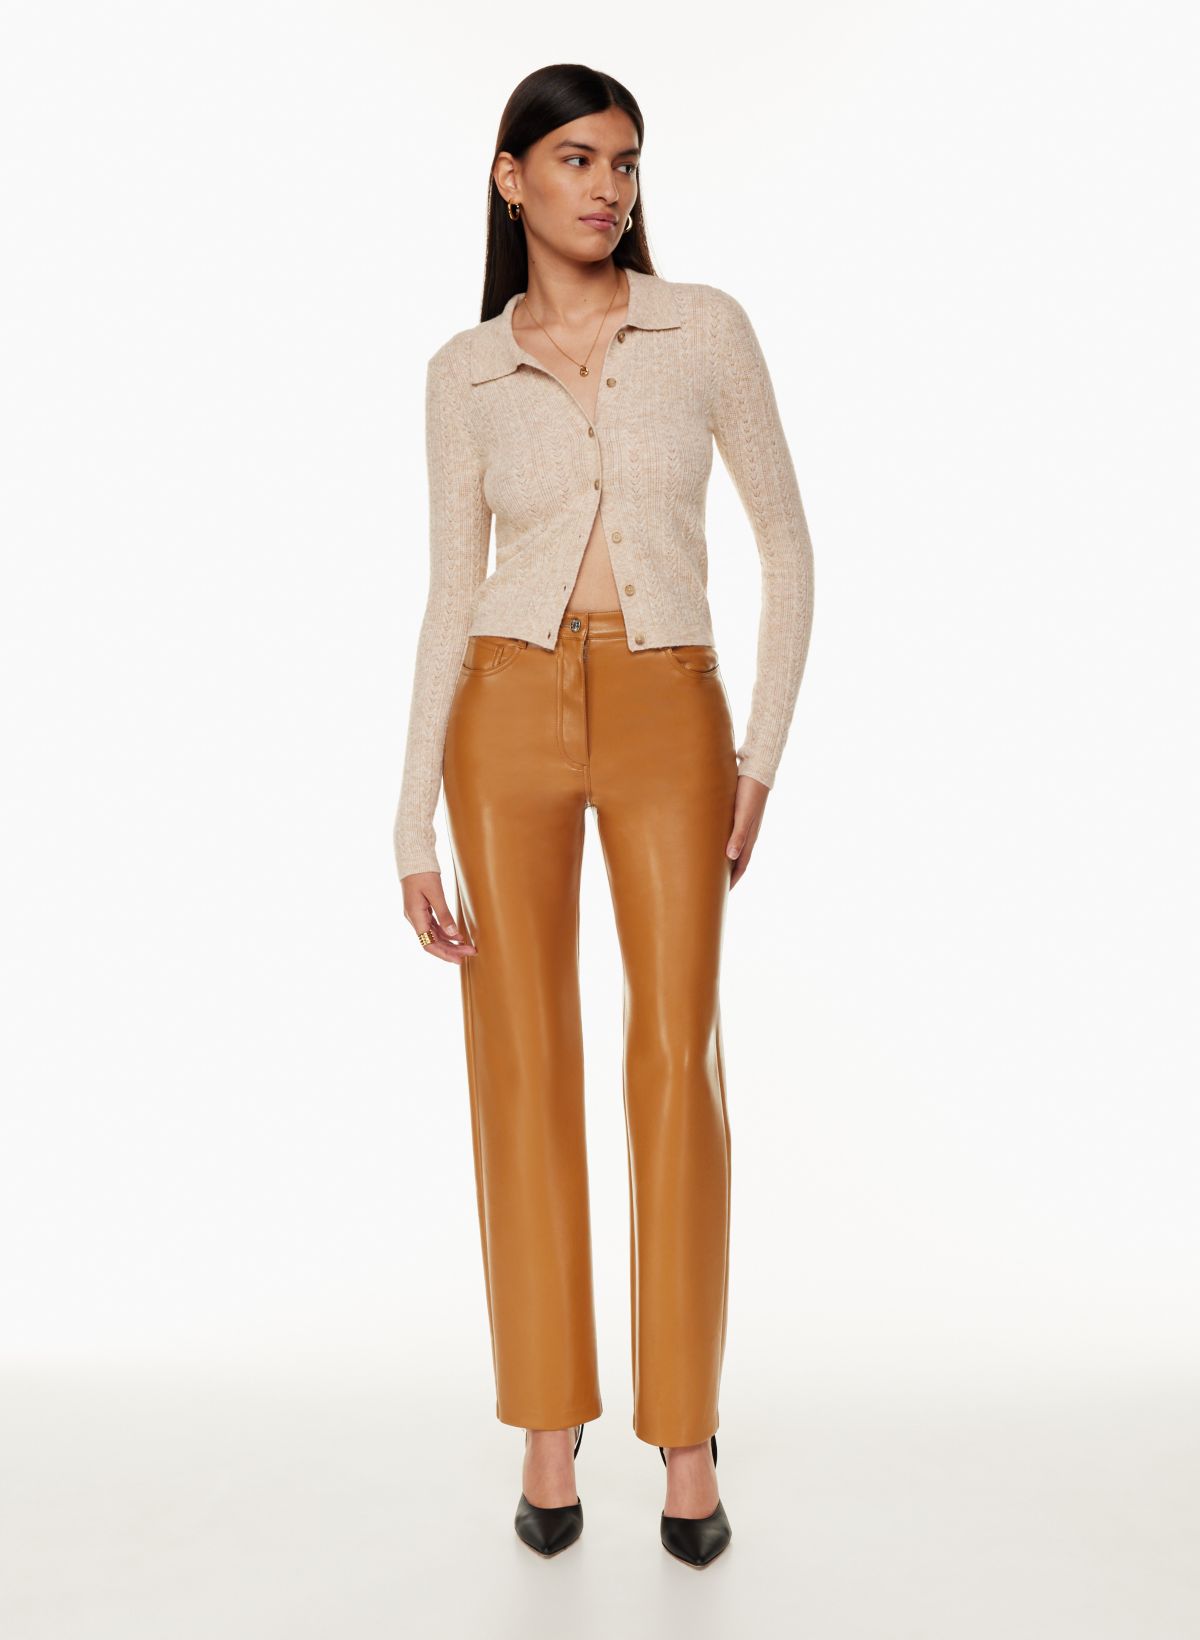 THE MELINA™ PANT  Professional outfits women, Summer work outfits